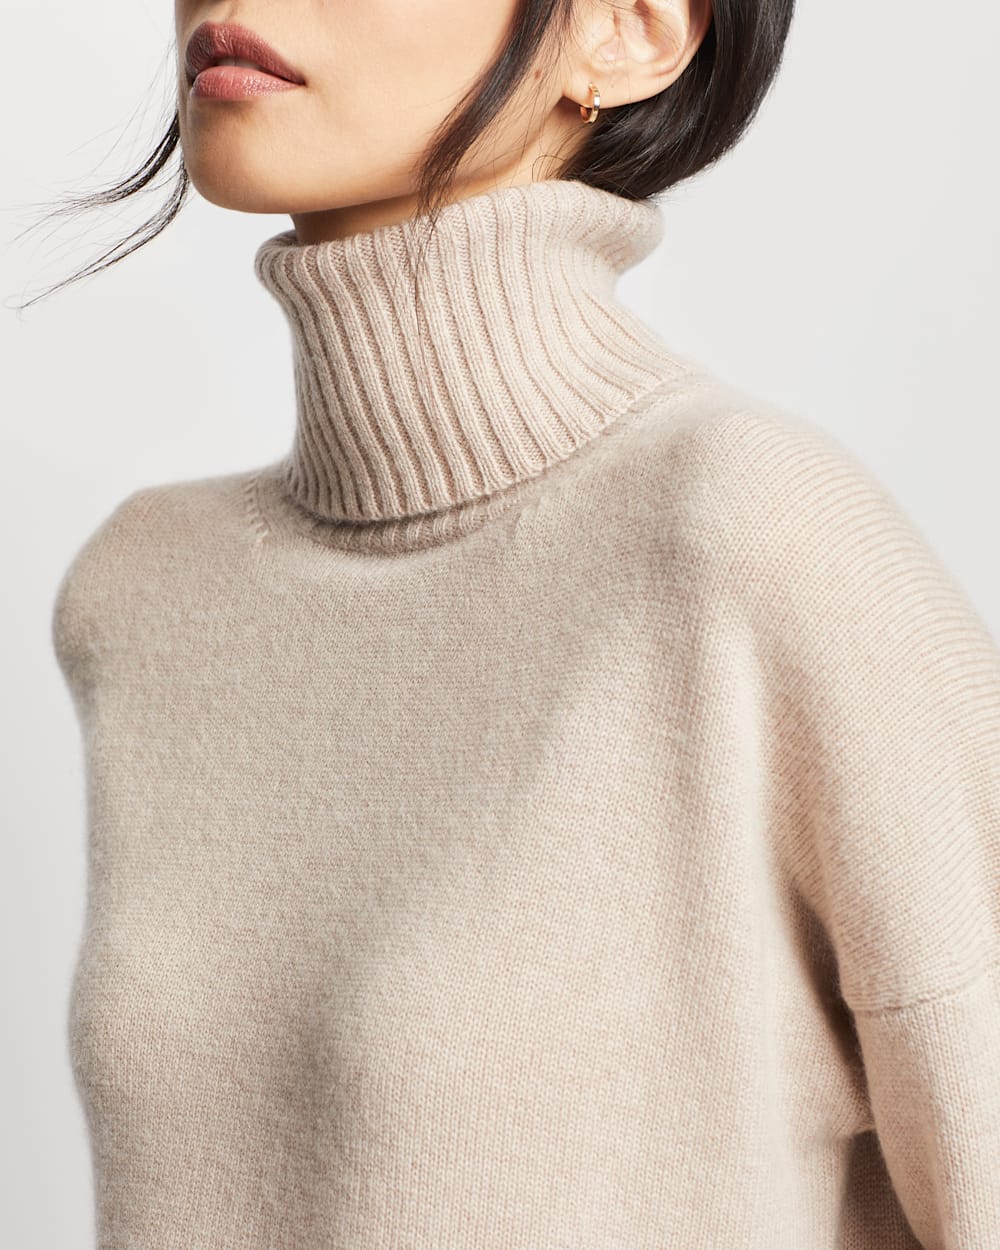 ALTERNATE VIEW OF WOMEN'S MERINO/CASHMERE OVERSIZED TURTLENECK IN WHEAT image number 2